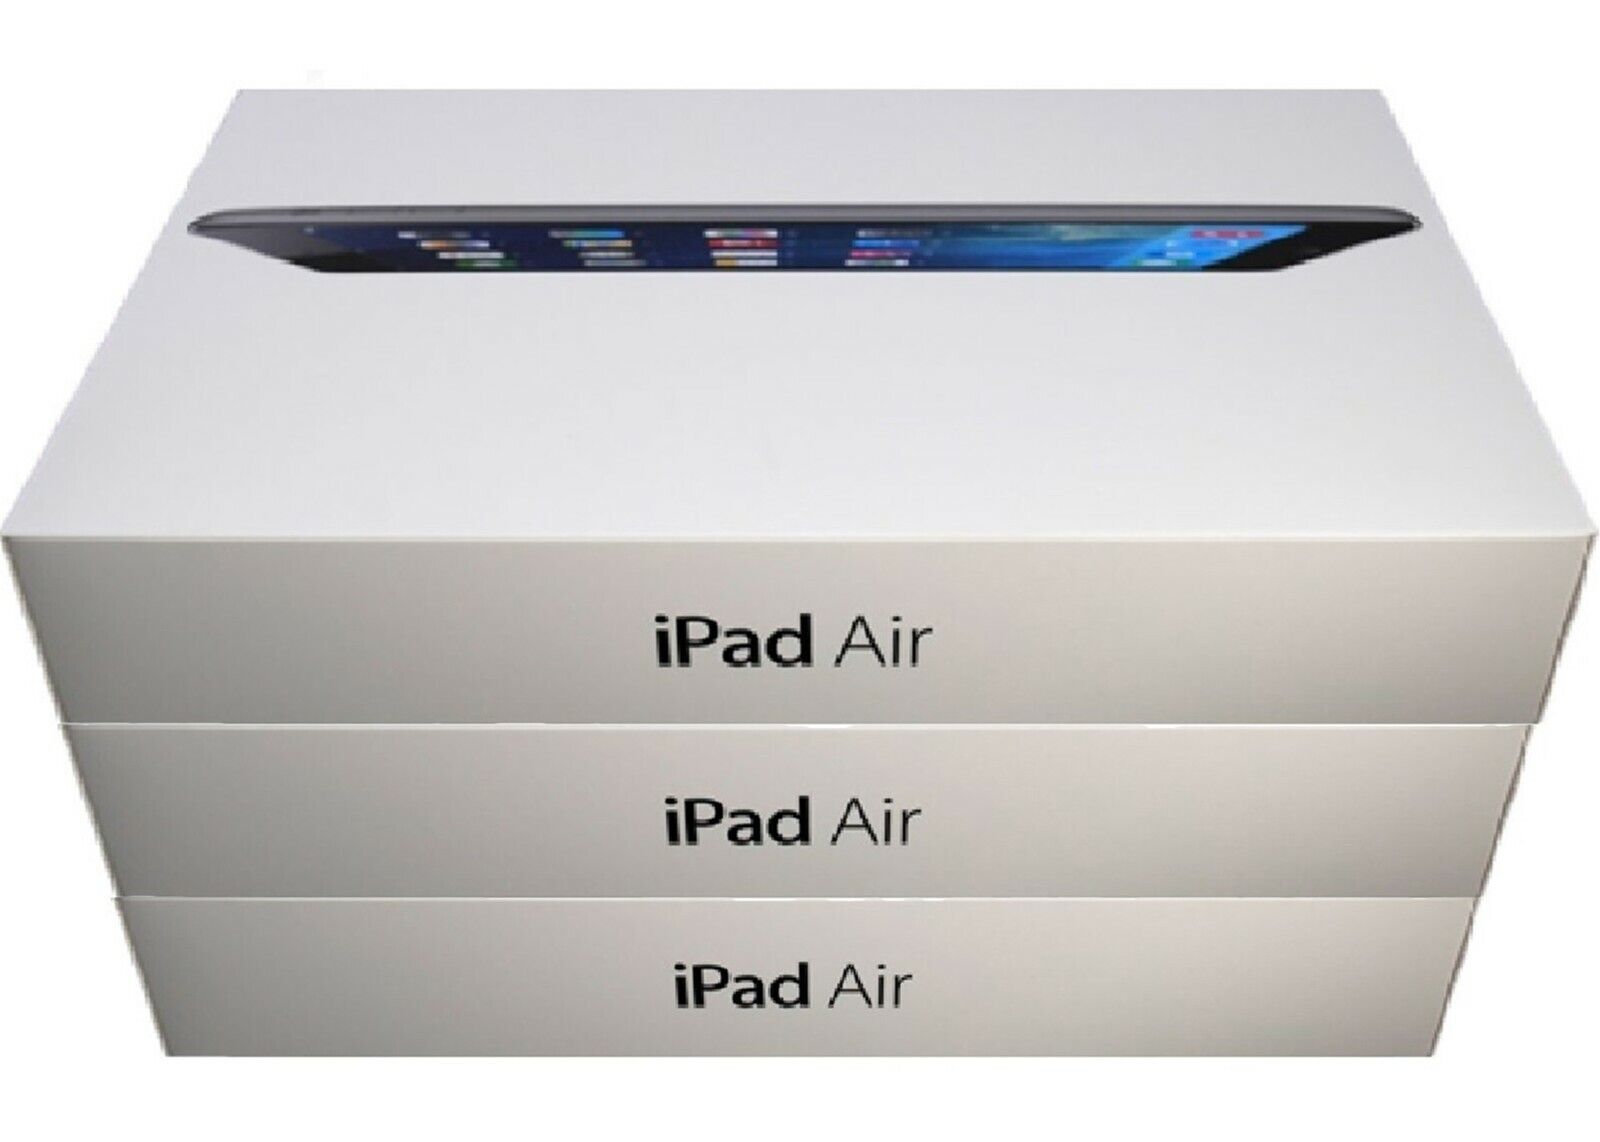 Original Box - Apple iPad Air, 64GB, Space Gray, Wi-Fi Only, and 9.7-inch Retina